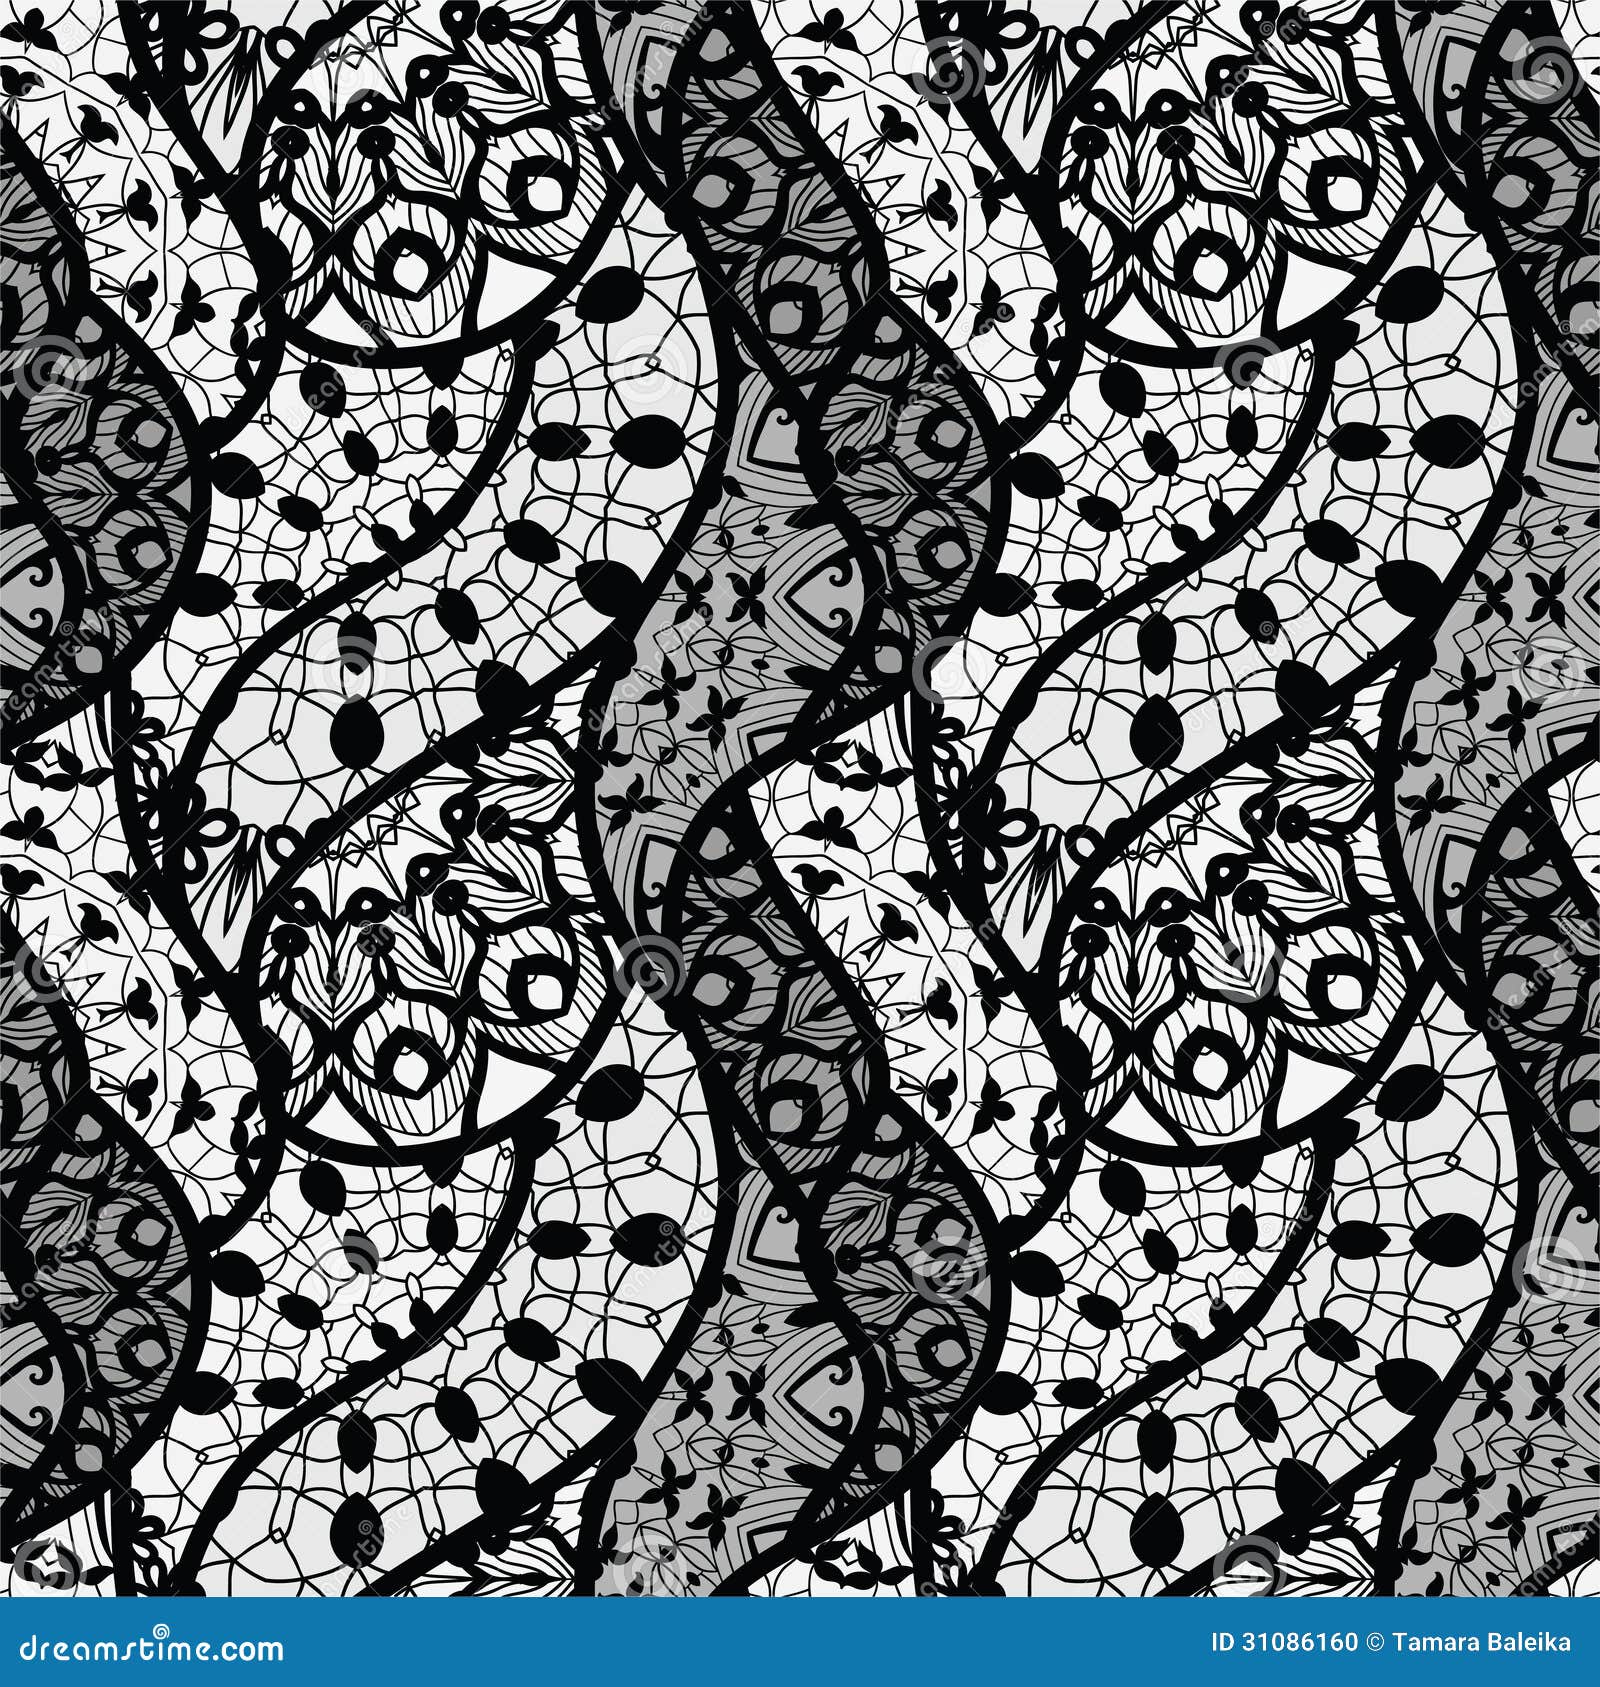 Lace Vector Fabric Seamless Pattern Stock Vector - Illustration of ...